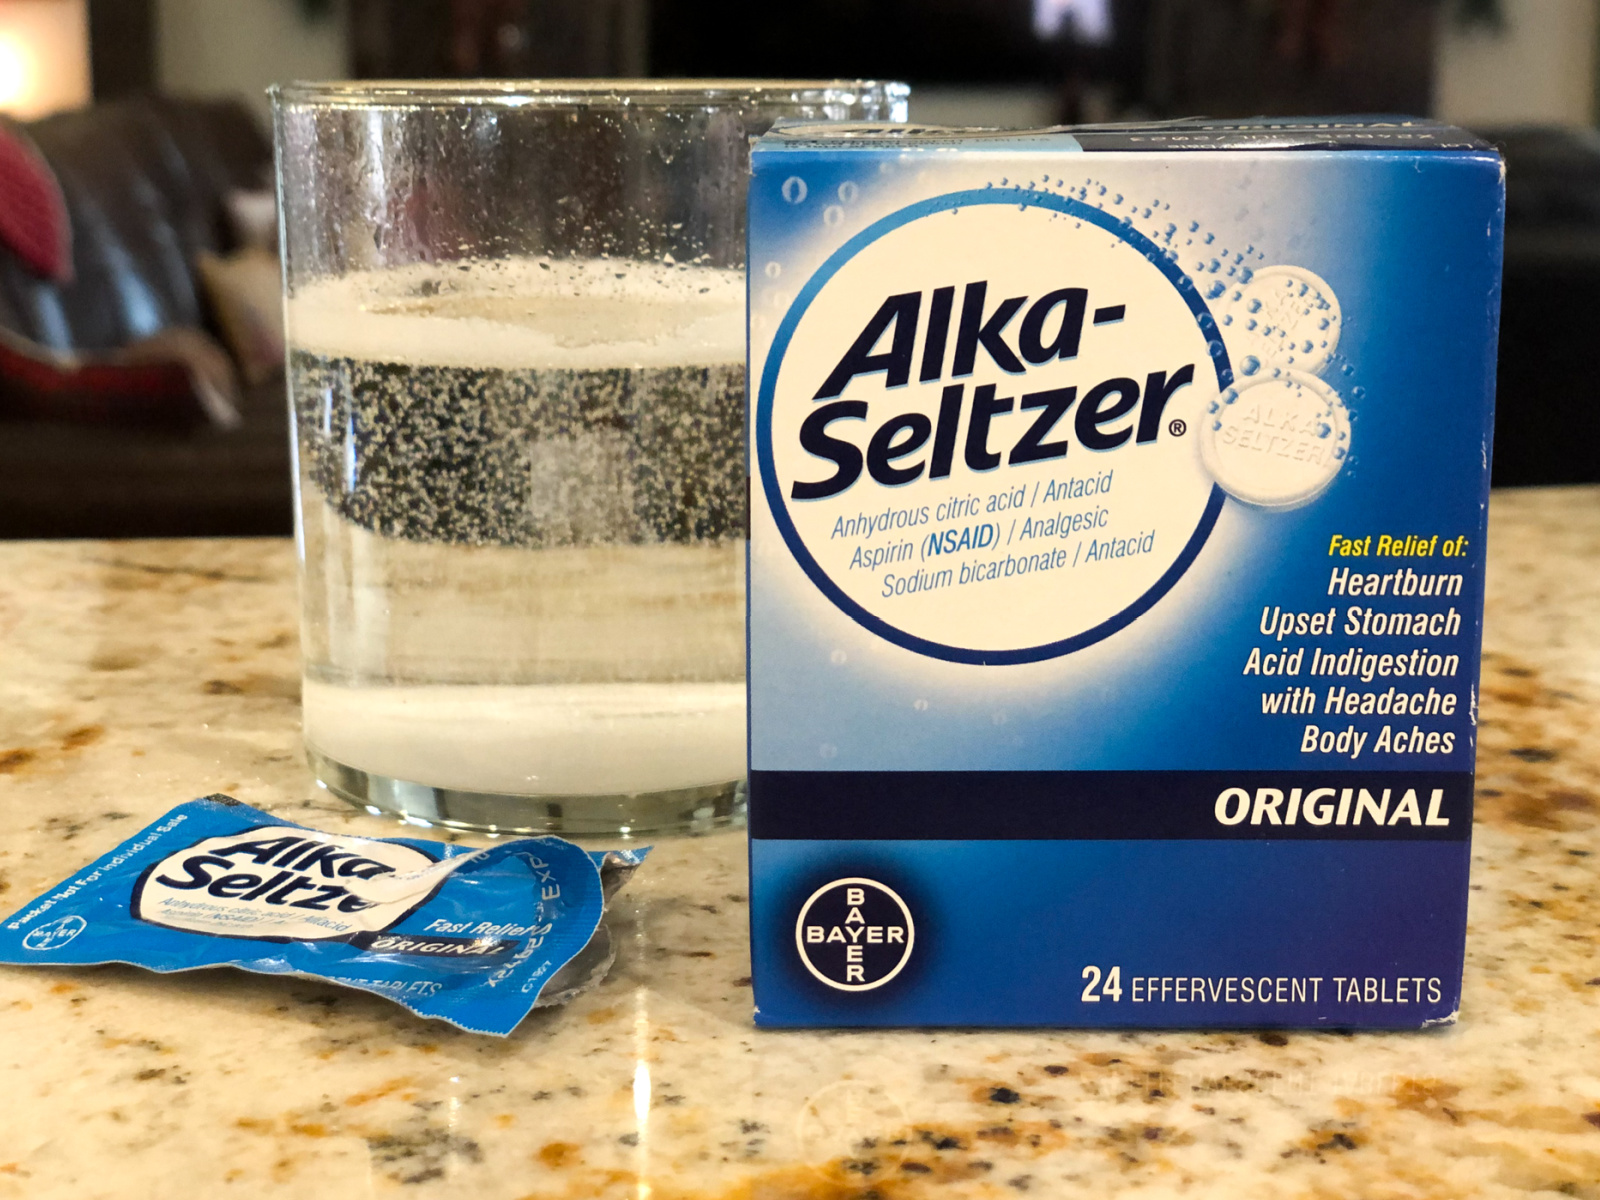 Get Boxes Of Alka-Seltzer As Low As $1.99 At Publix (Regular Price $4.99)